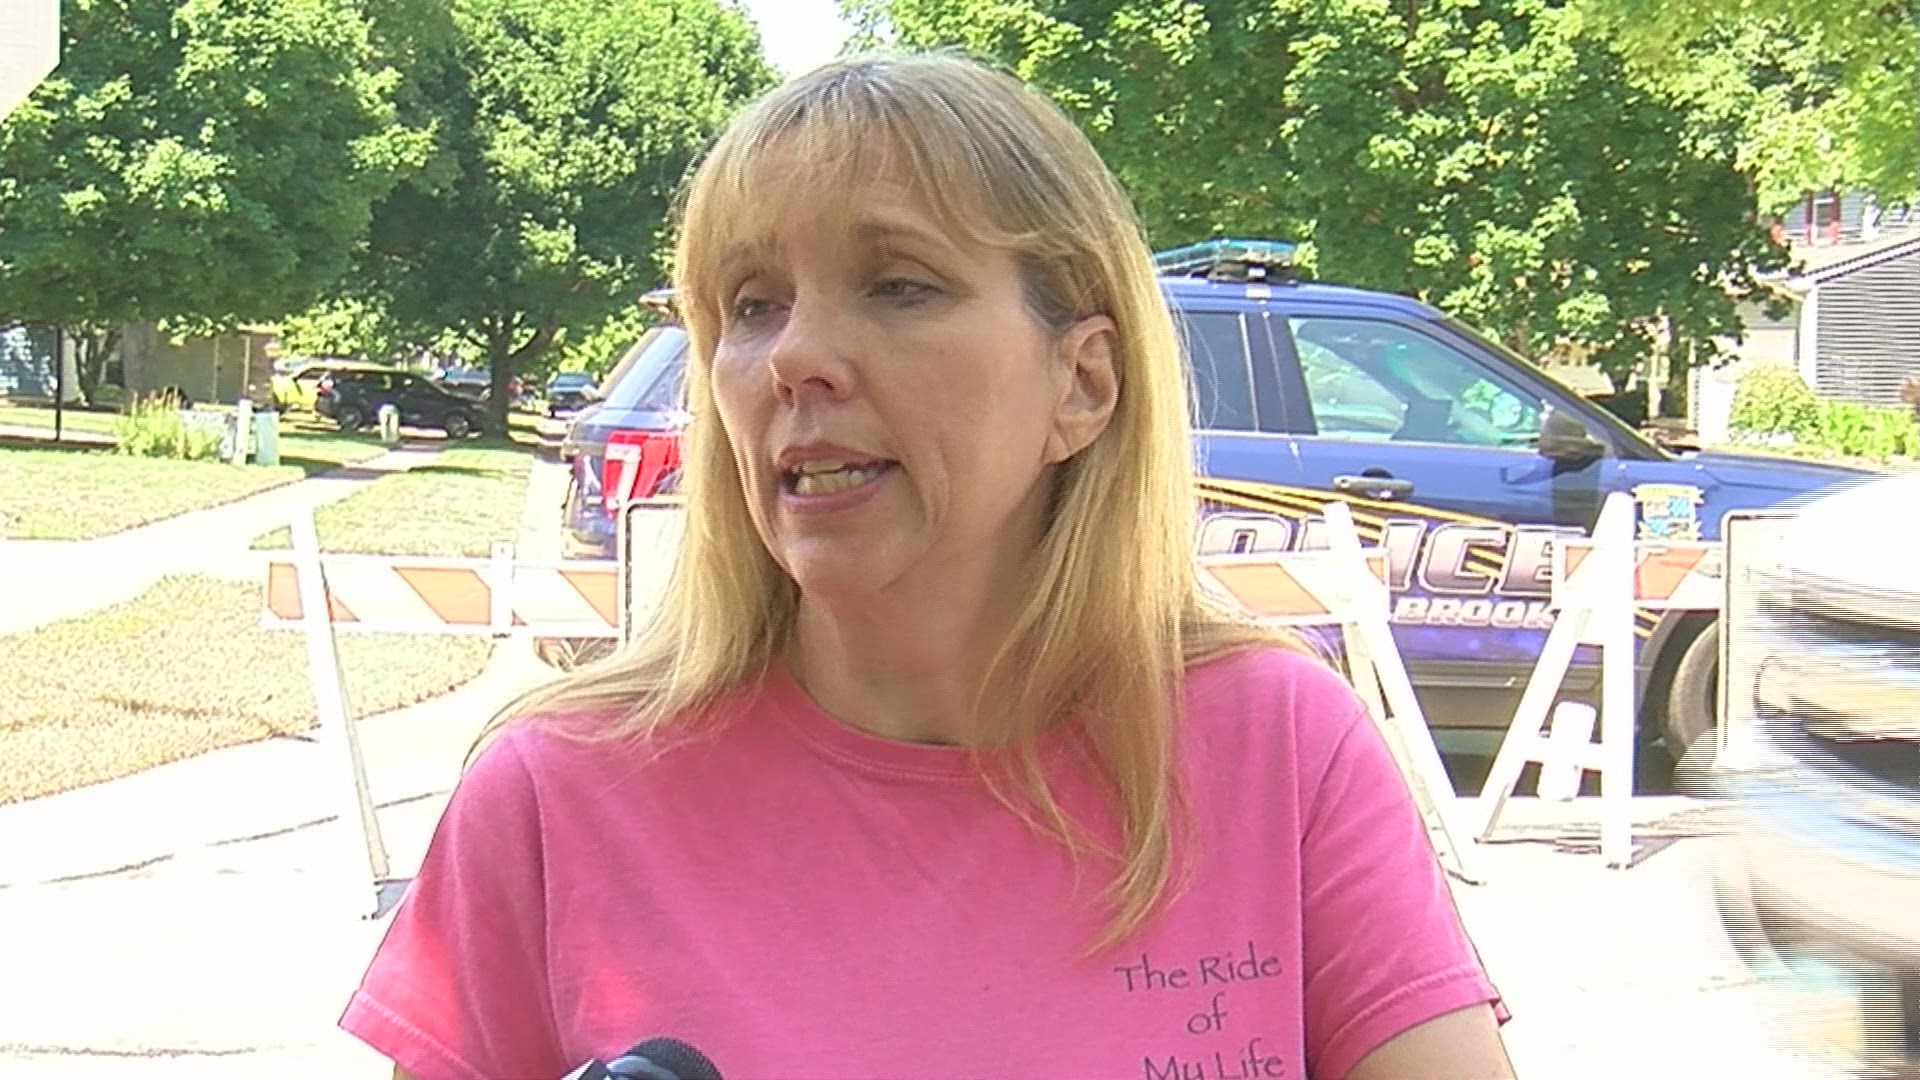 A Bellbrook, Ohio woman was neighbors with the Dayton shooting suspect for 10 years.